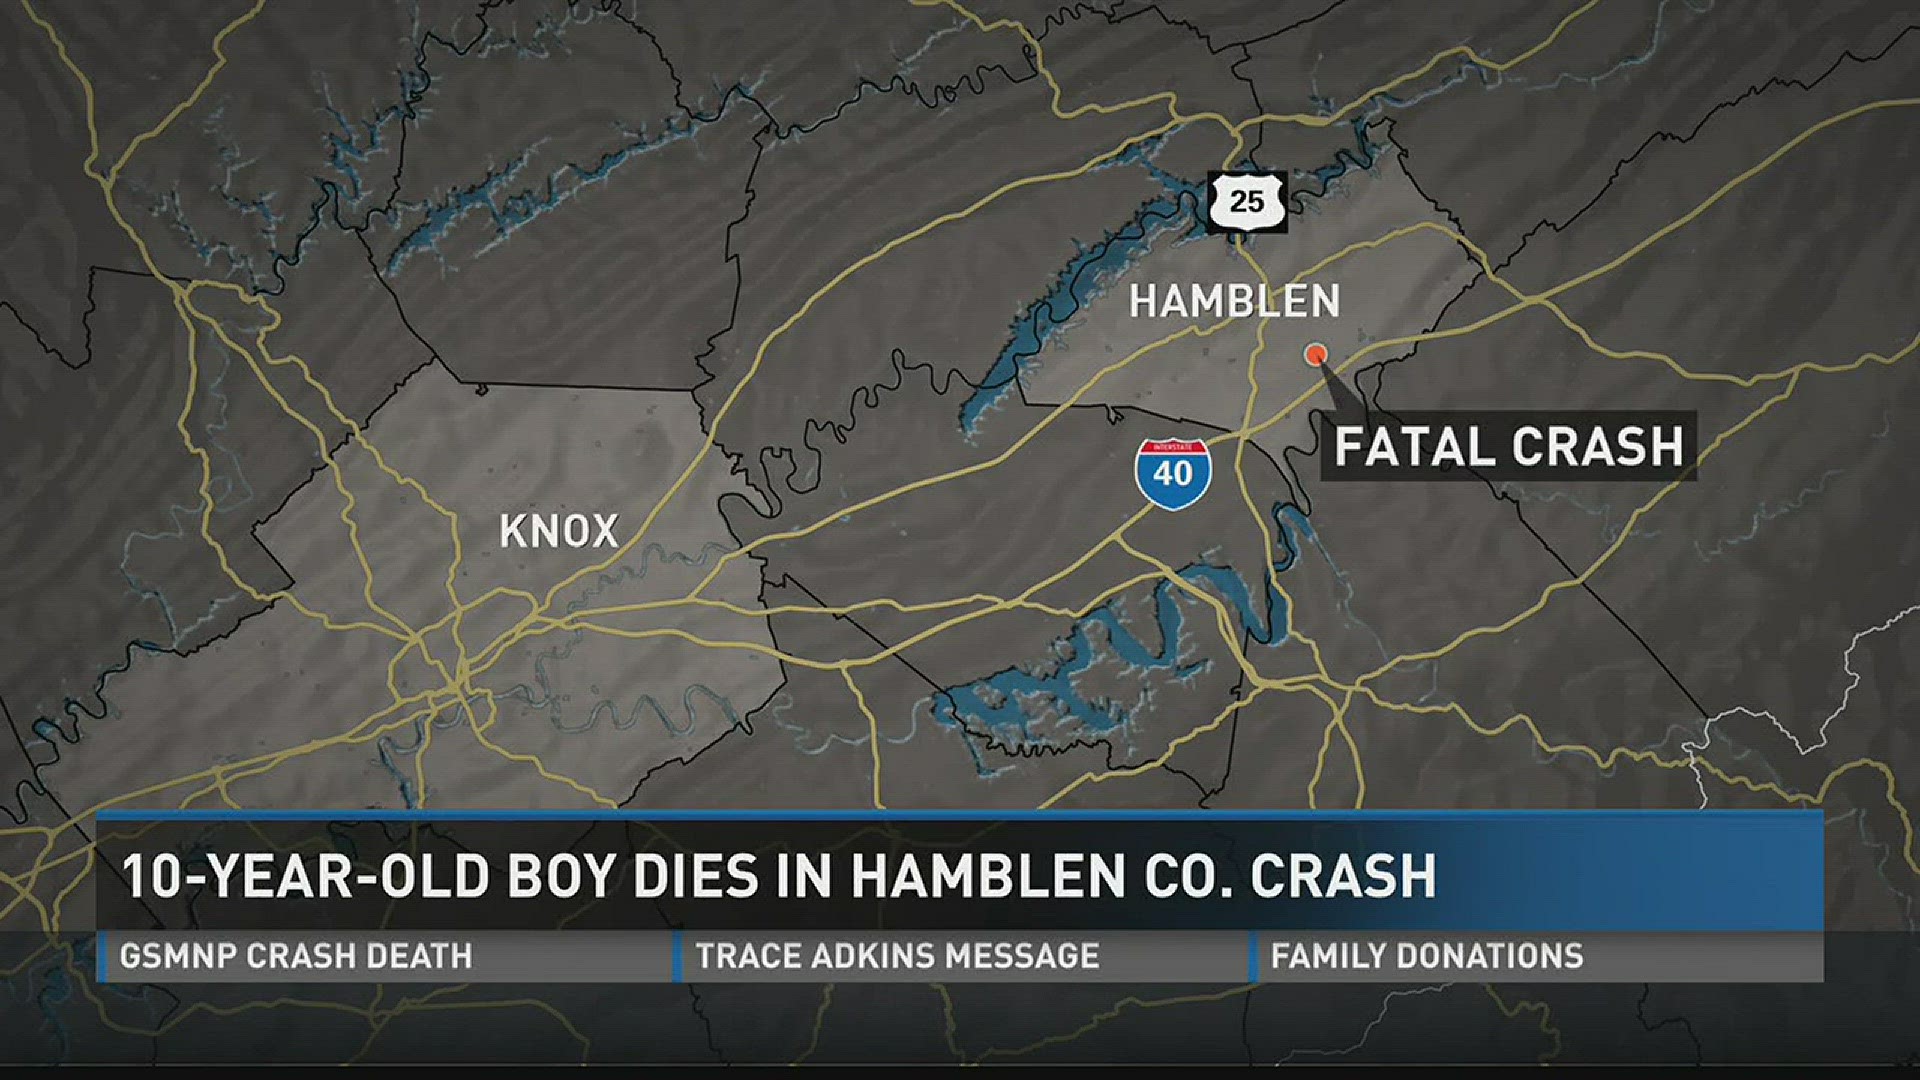 A 10-year-old boy died in a Hamblen County crash on Thursday afternoon.